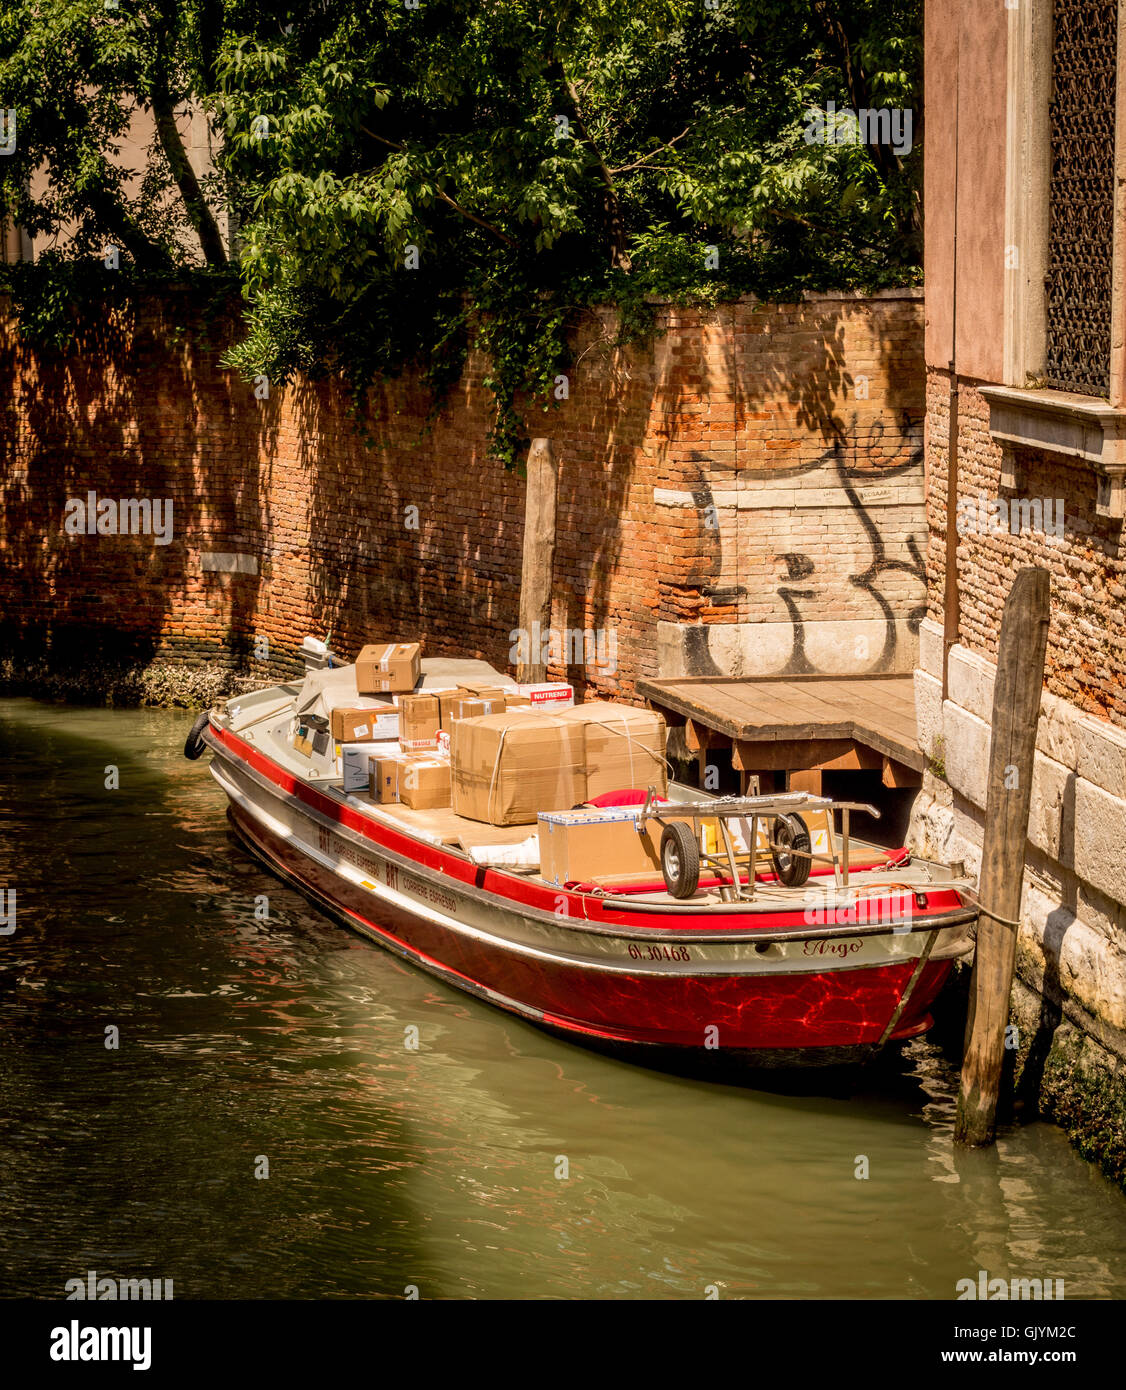 Delivery boat laden with parcels moored in a small canal in Venice, Italy. Stock Photo